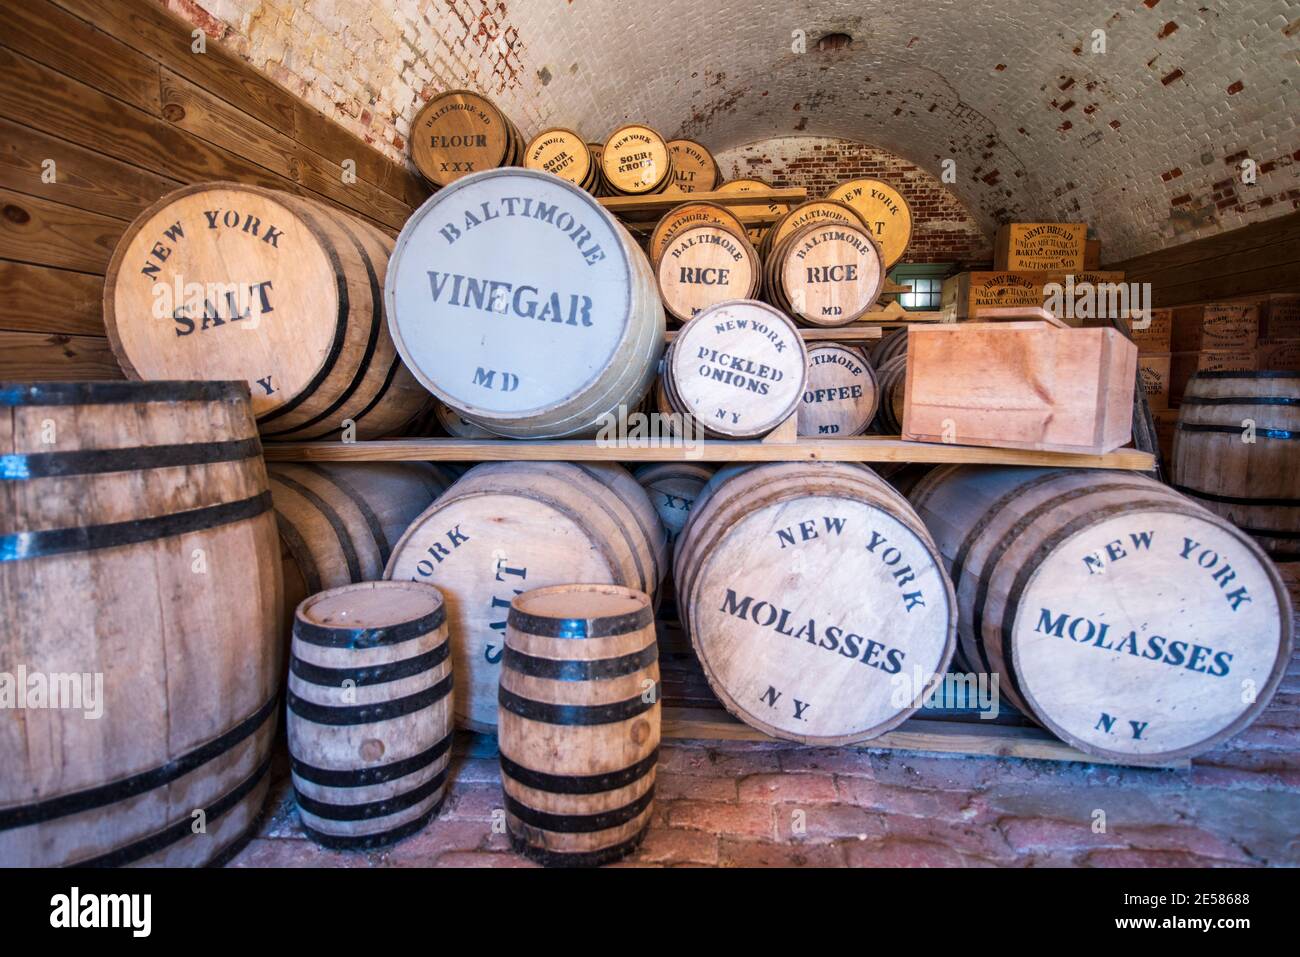 Barrels labeled 'vinegar, salt beef, rice, flour, salt, molasses, pickled onions  and coffee' fill a recreated ration storage room at Fort Macon State Stock Photo